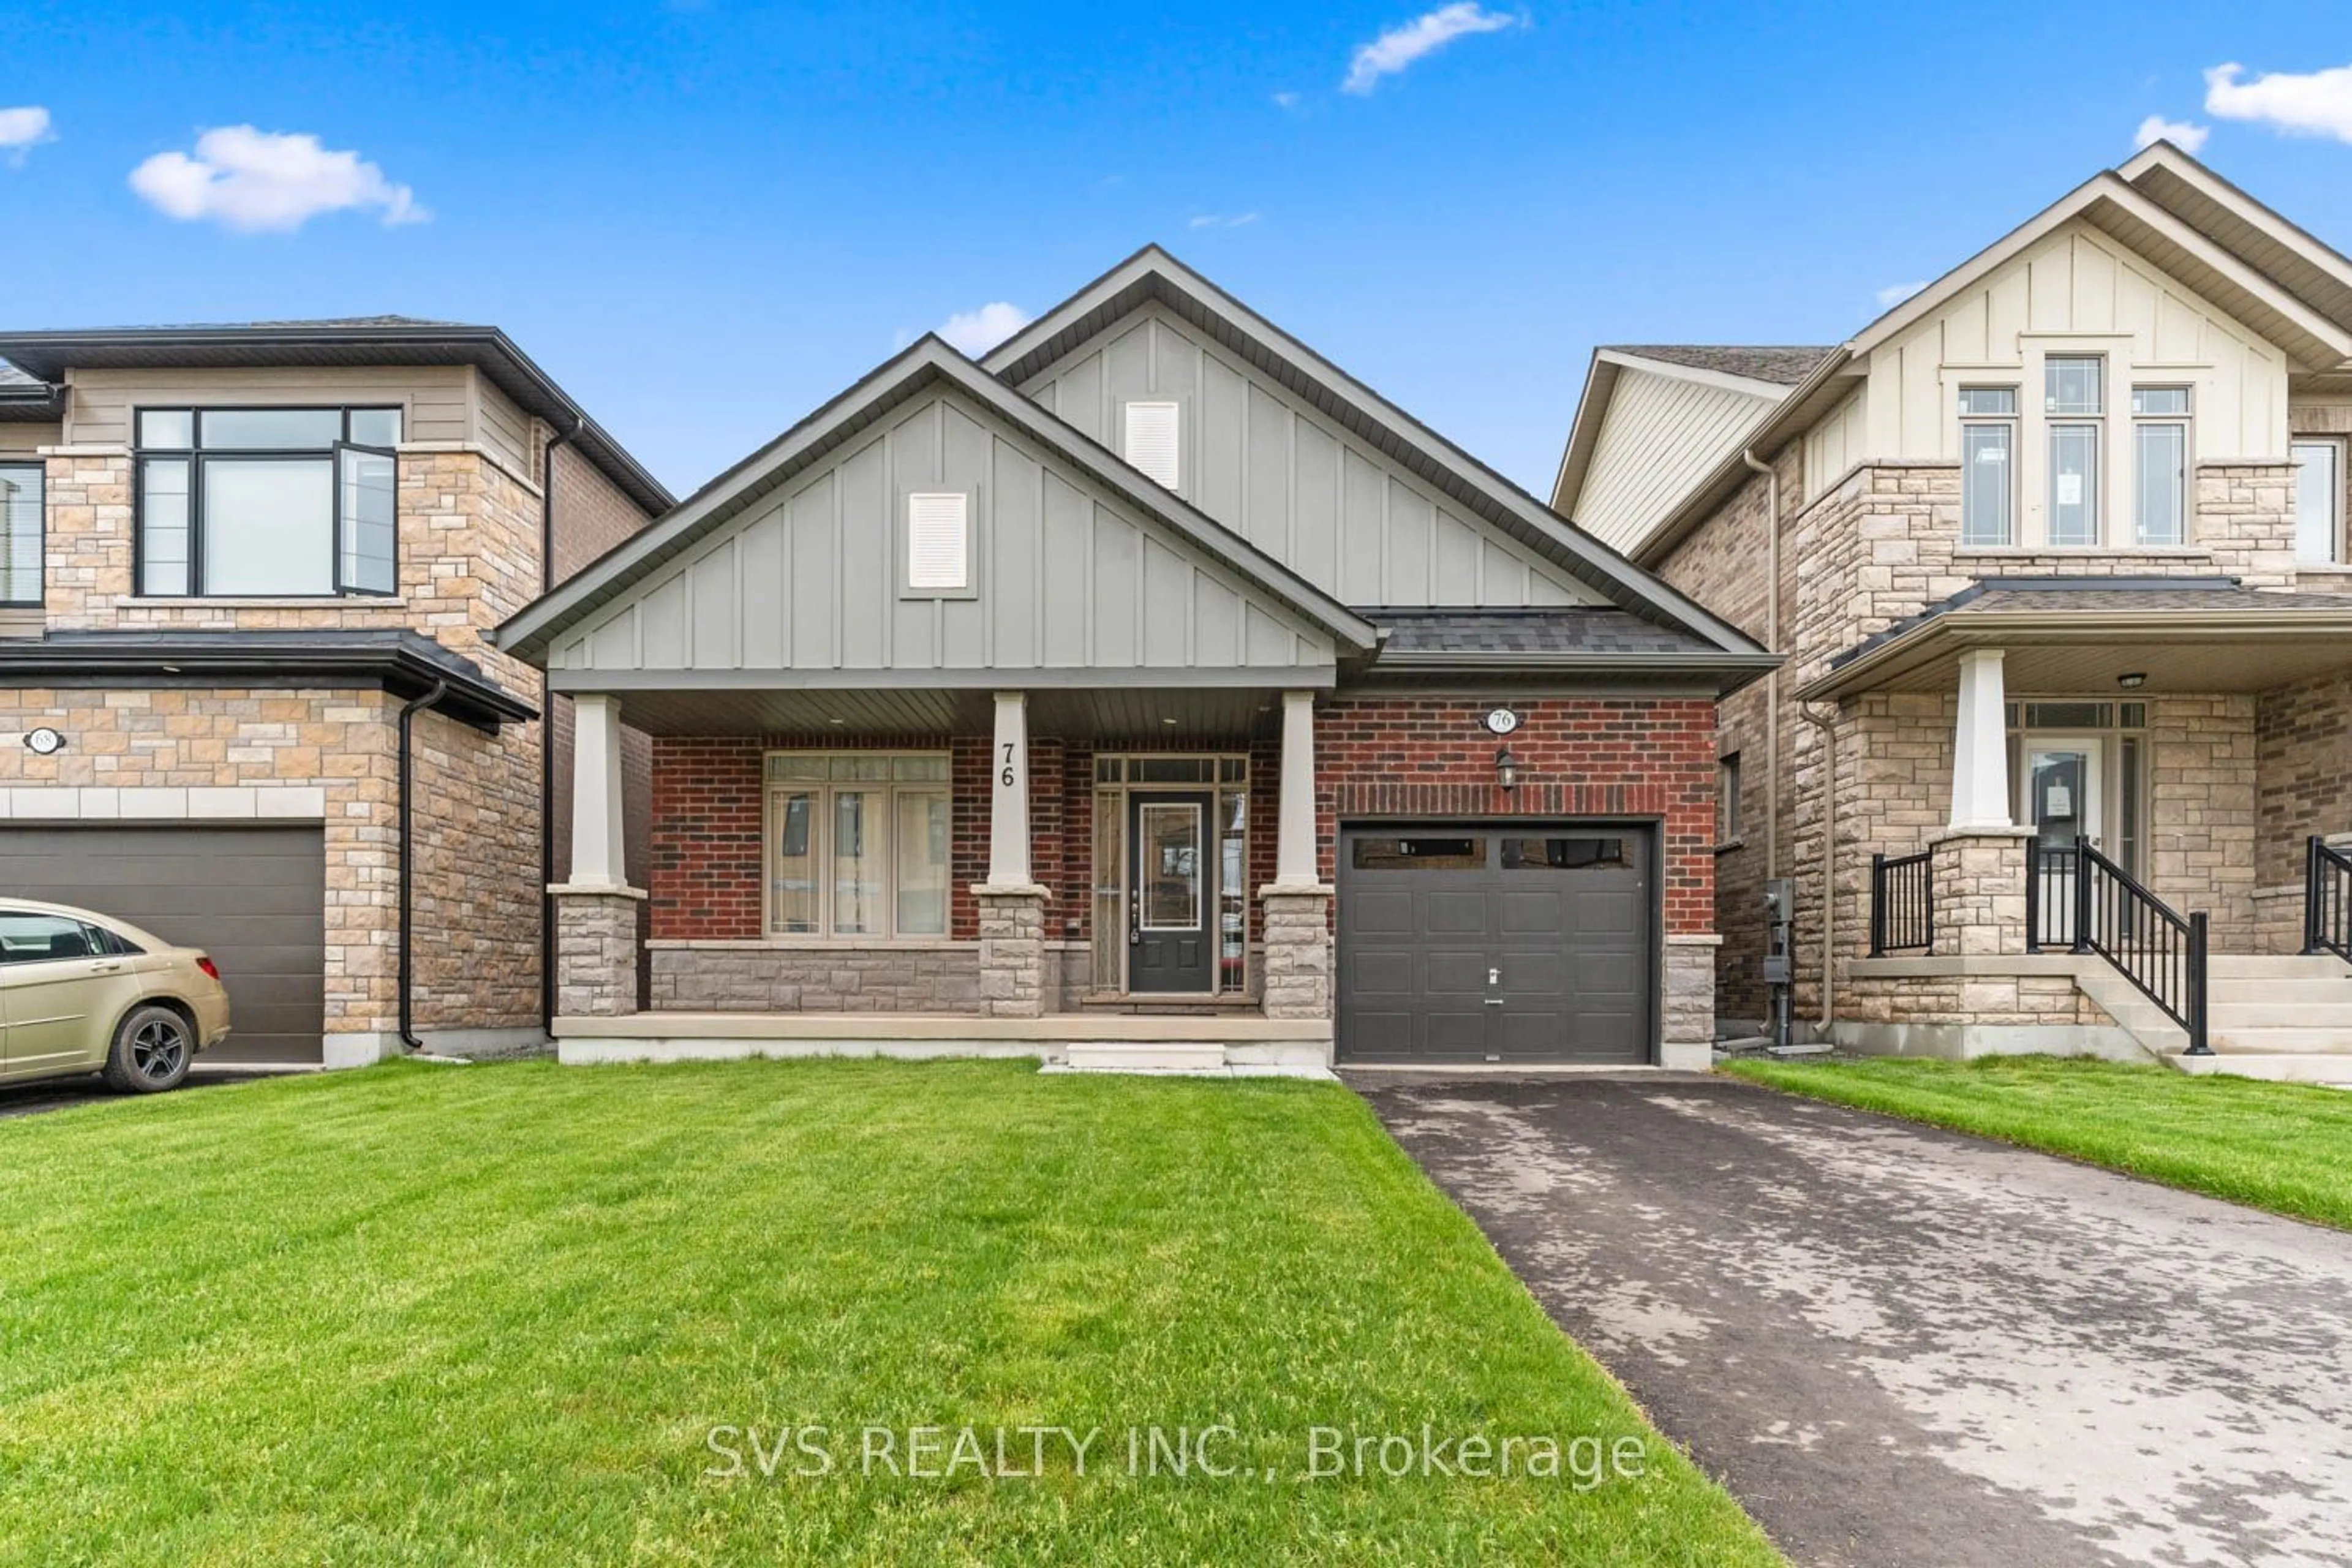 Home with brick exterior material for 76 Midland Pl, Welland Ontario L3B 6H9